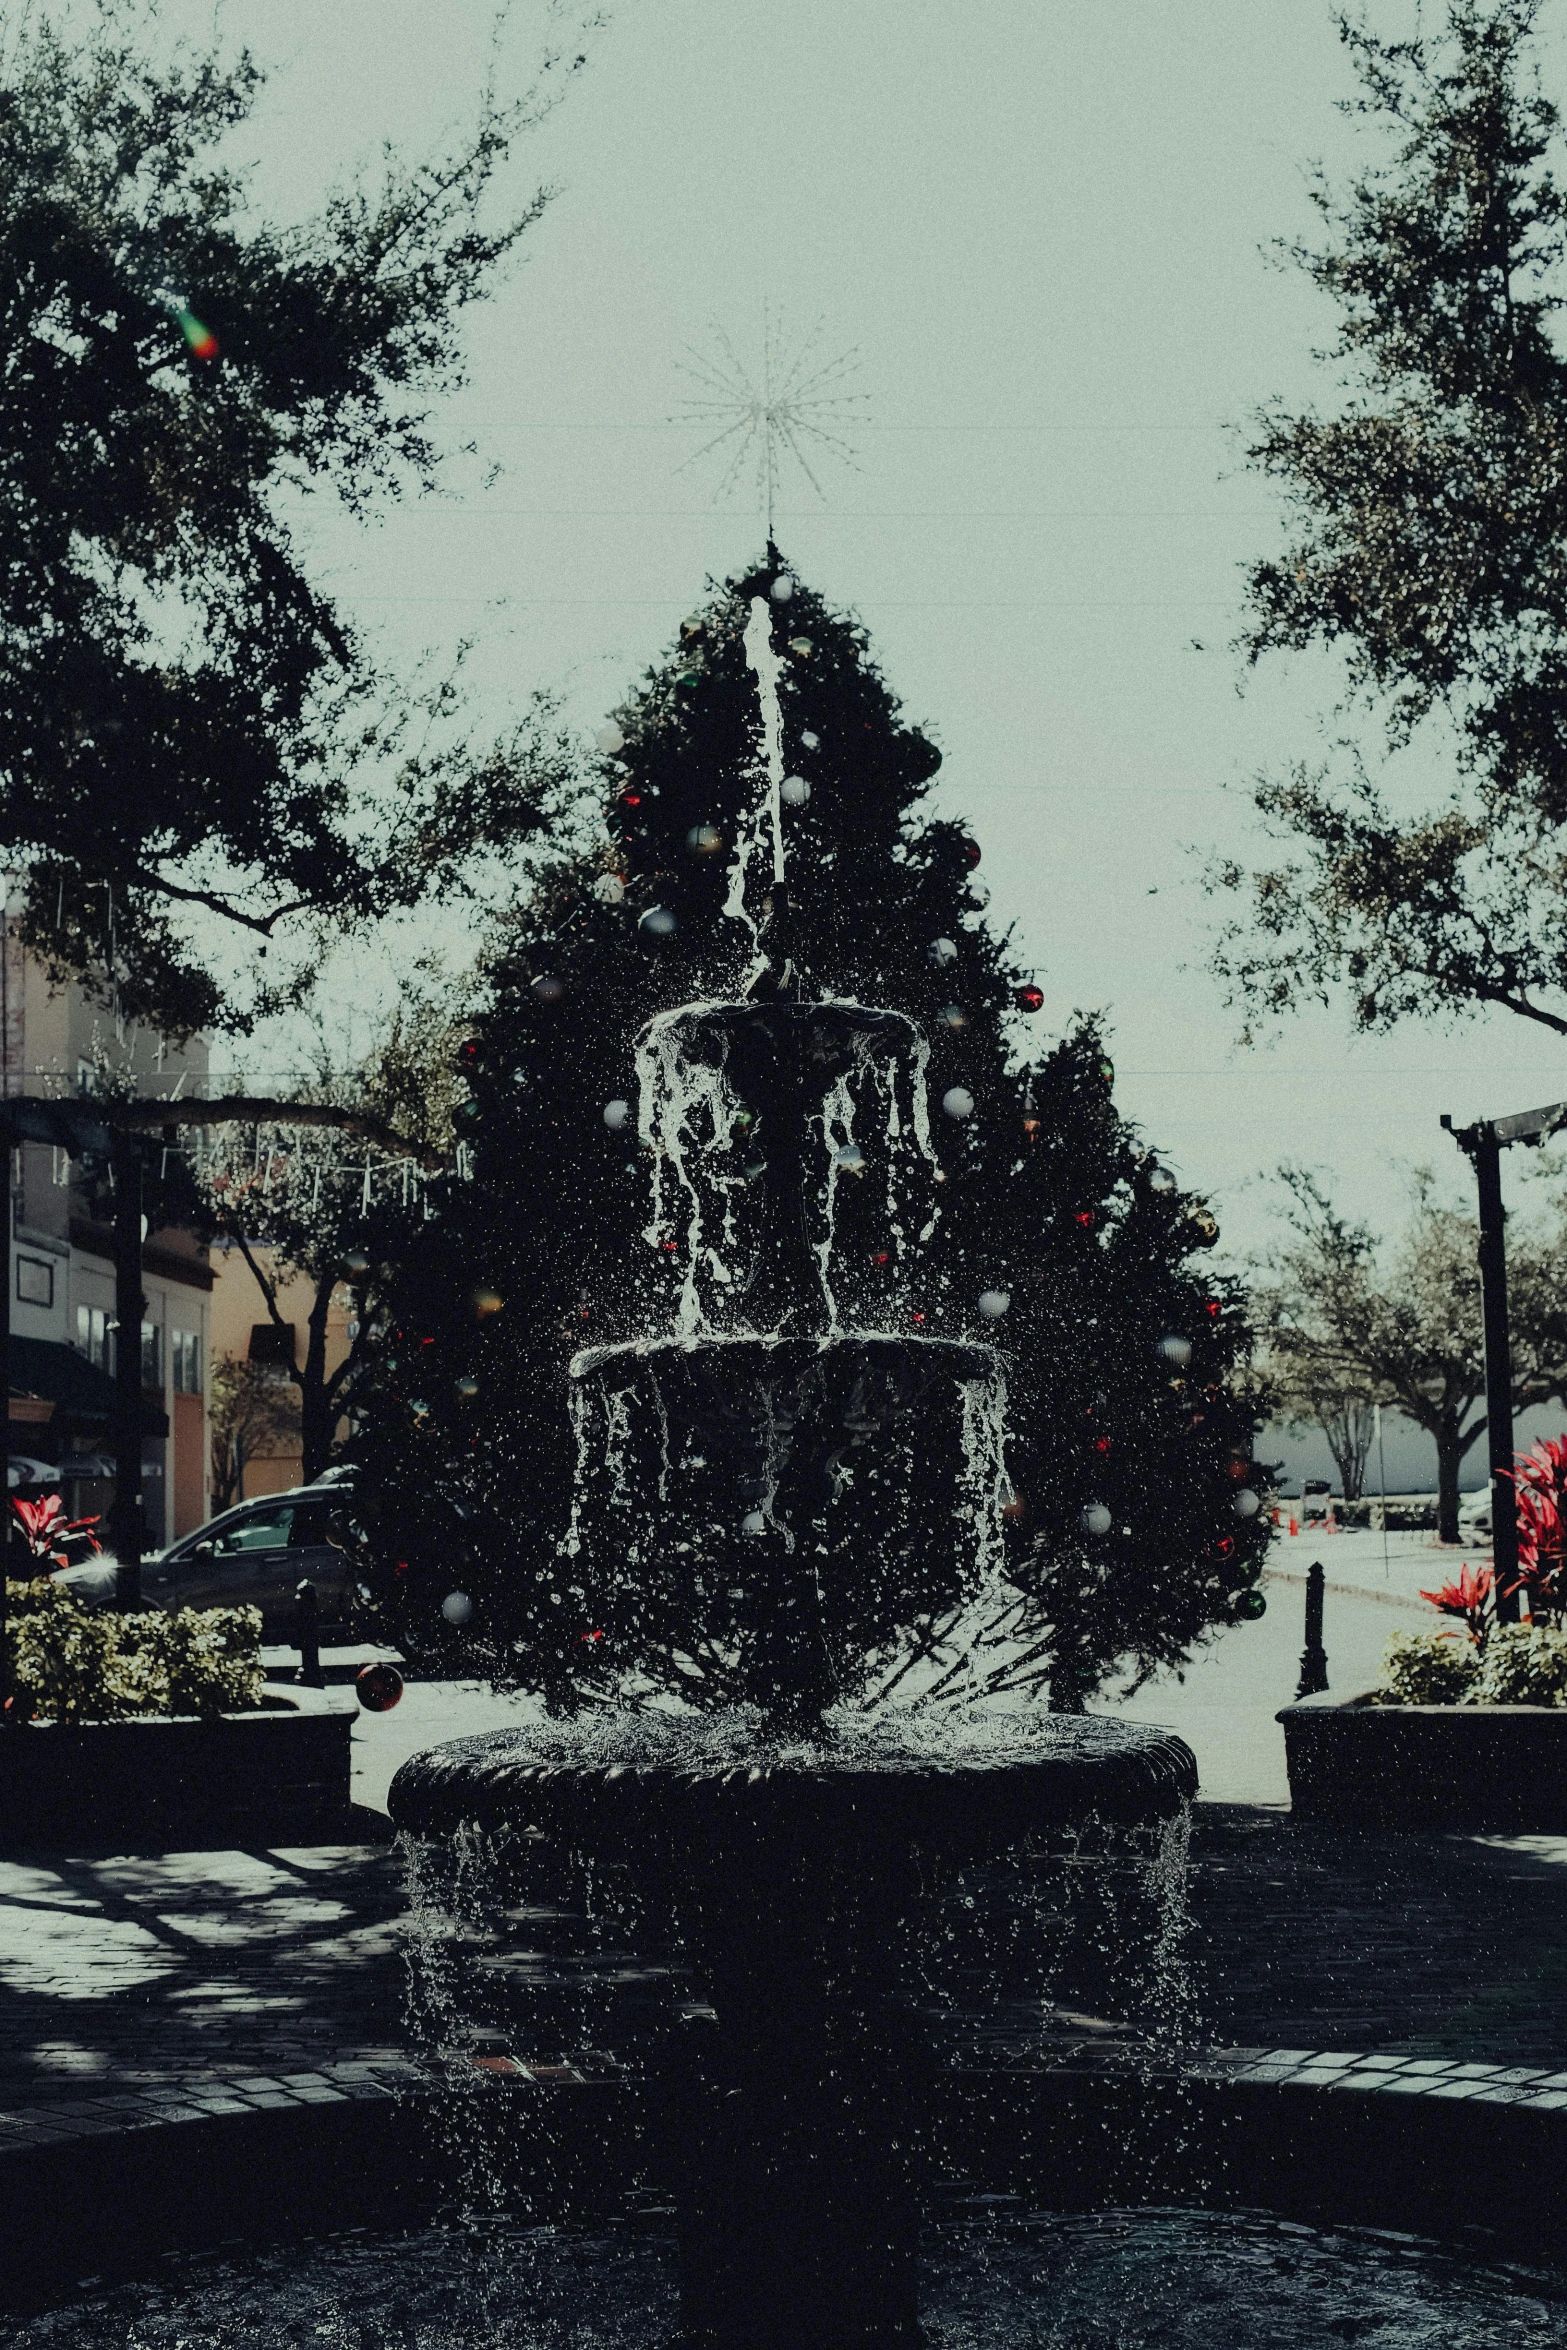 an artistic picture of a fountain next to some trees